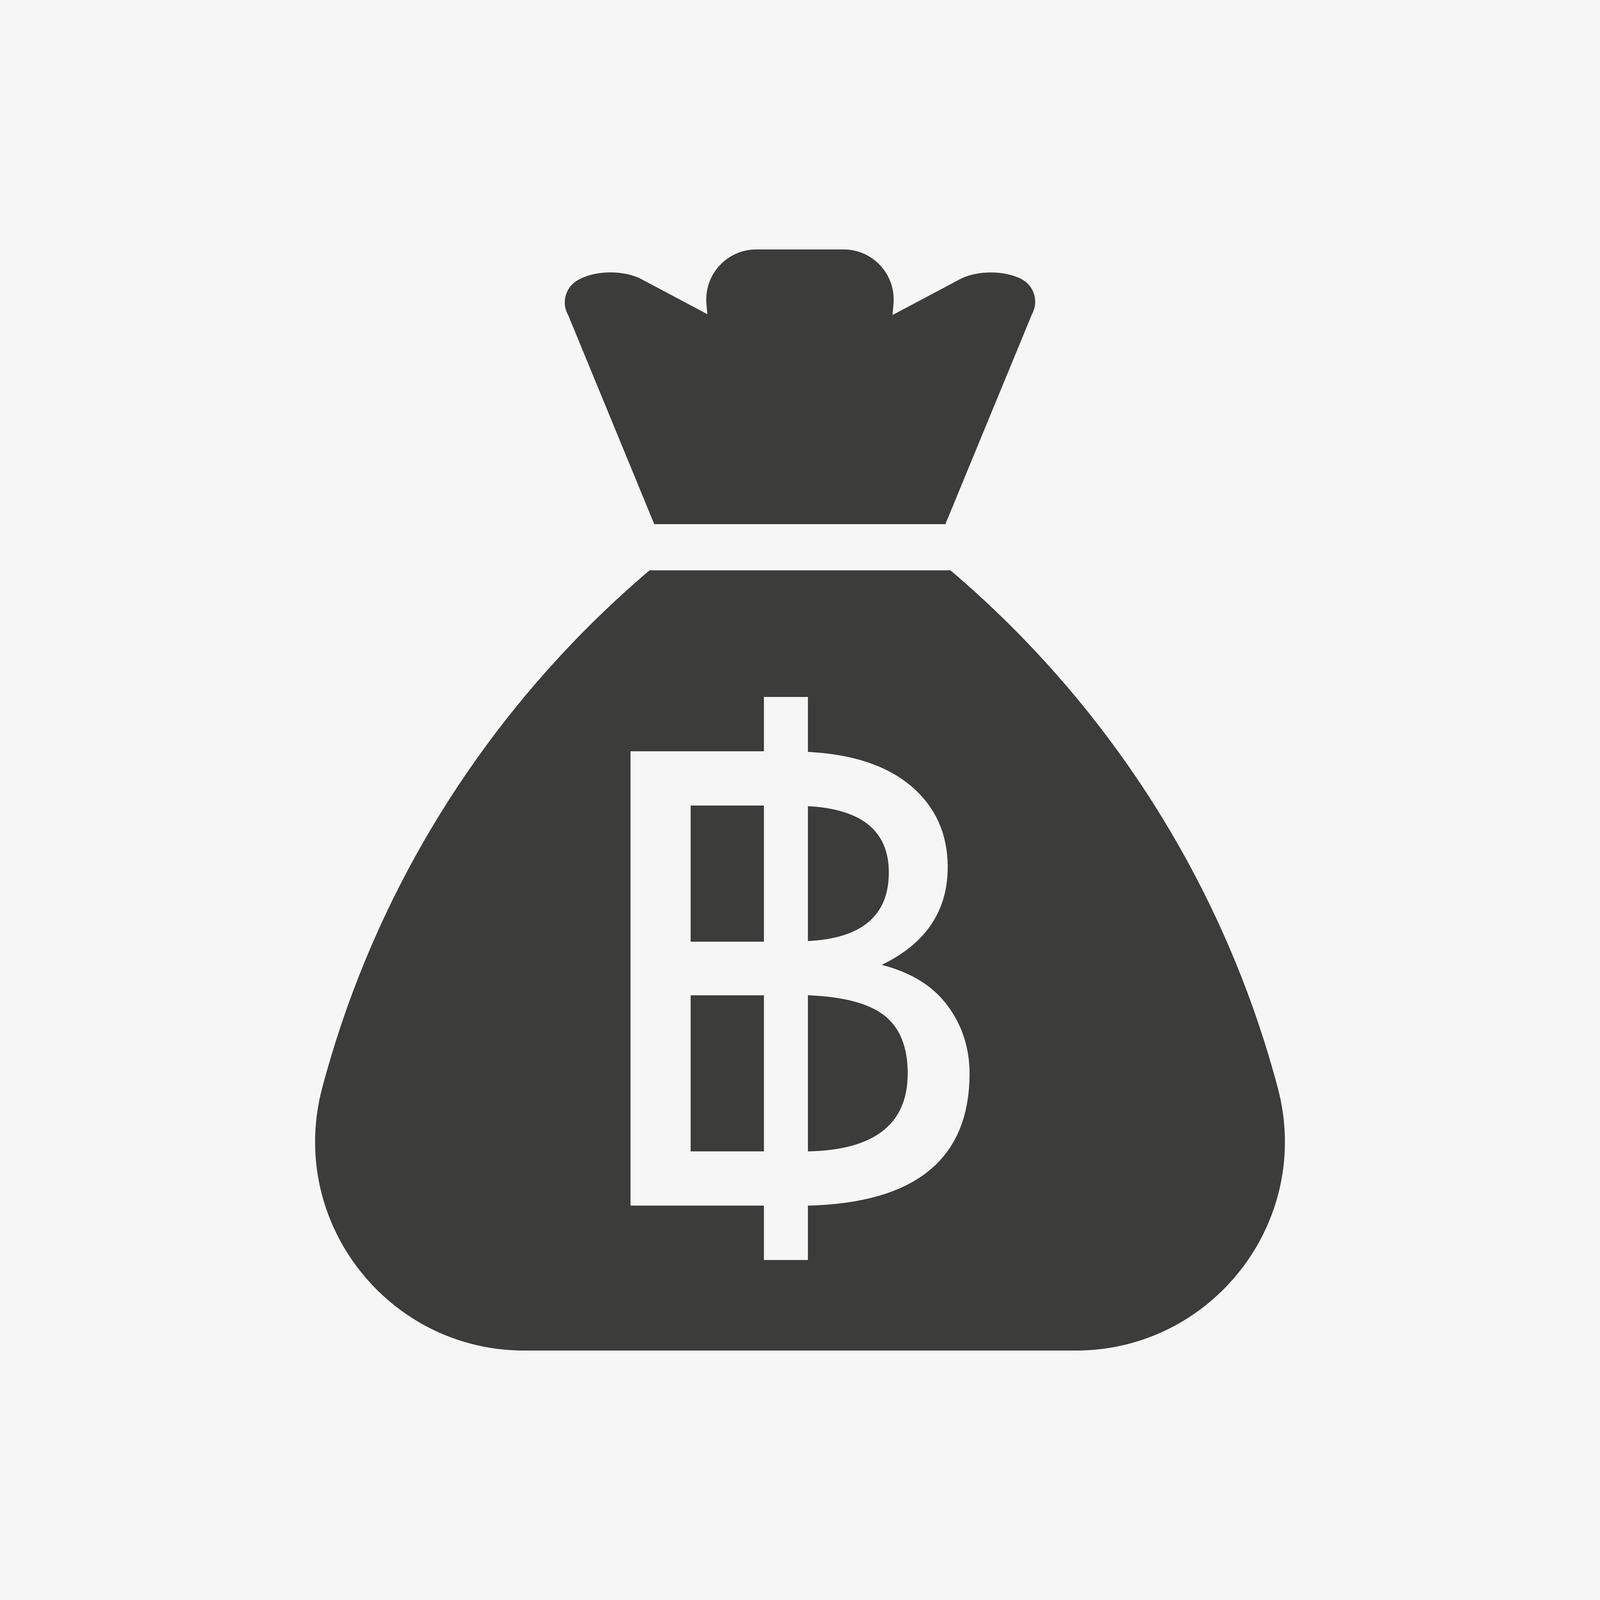 Baht icon. Money bag flat icon vector pictogram. Sack with Thai baht isolated on white background. Thai currency symbol.